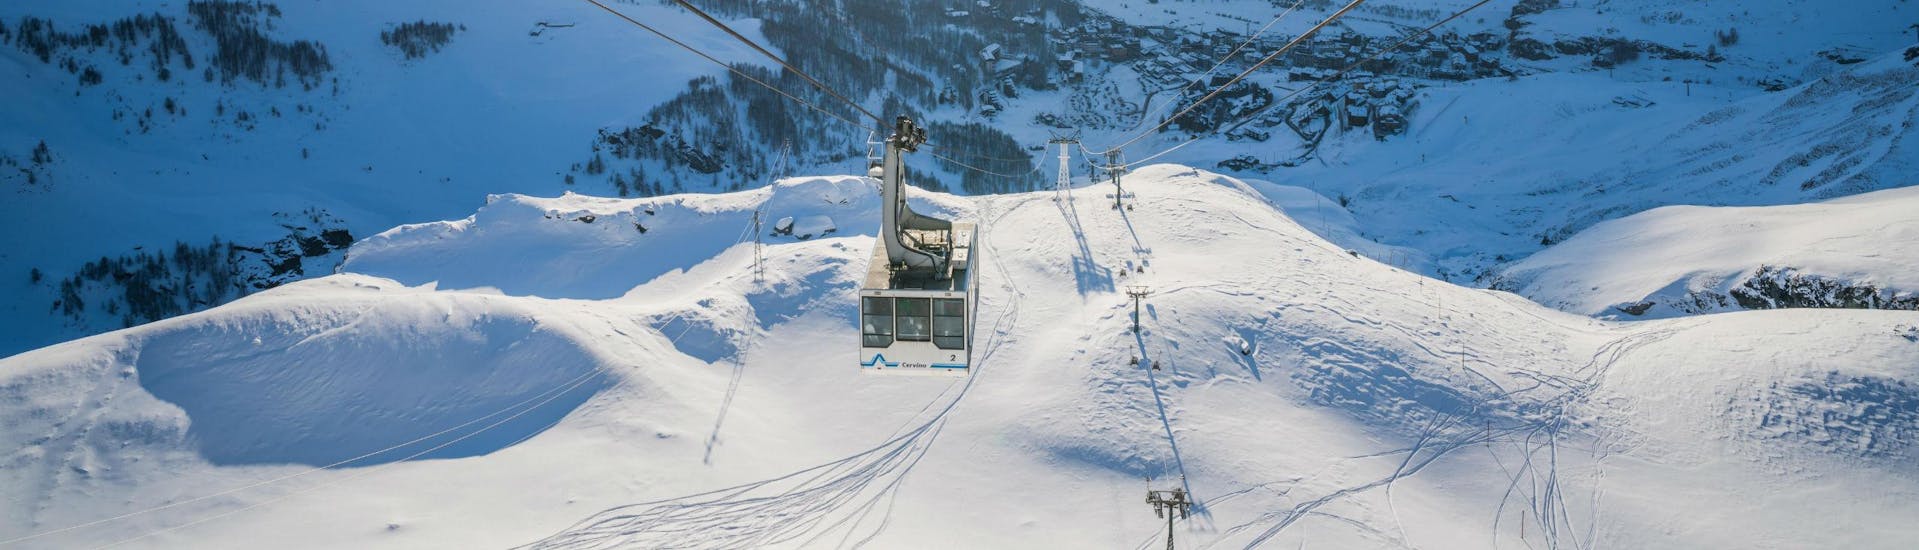 An image of a cable car ascending the mountain in the italian ski resort of Cervinia in the Aosta Valley, where visitors can learn to ski during their ski lessons provided by local ski schools.